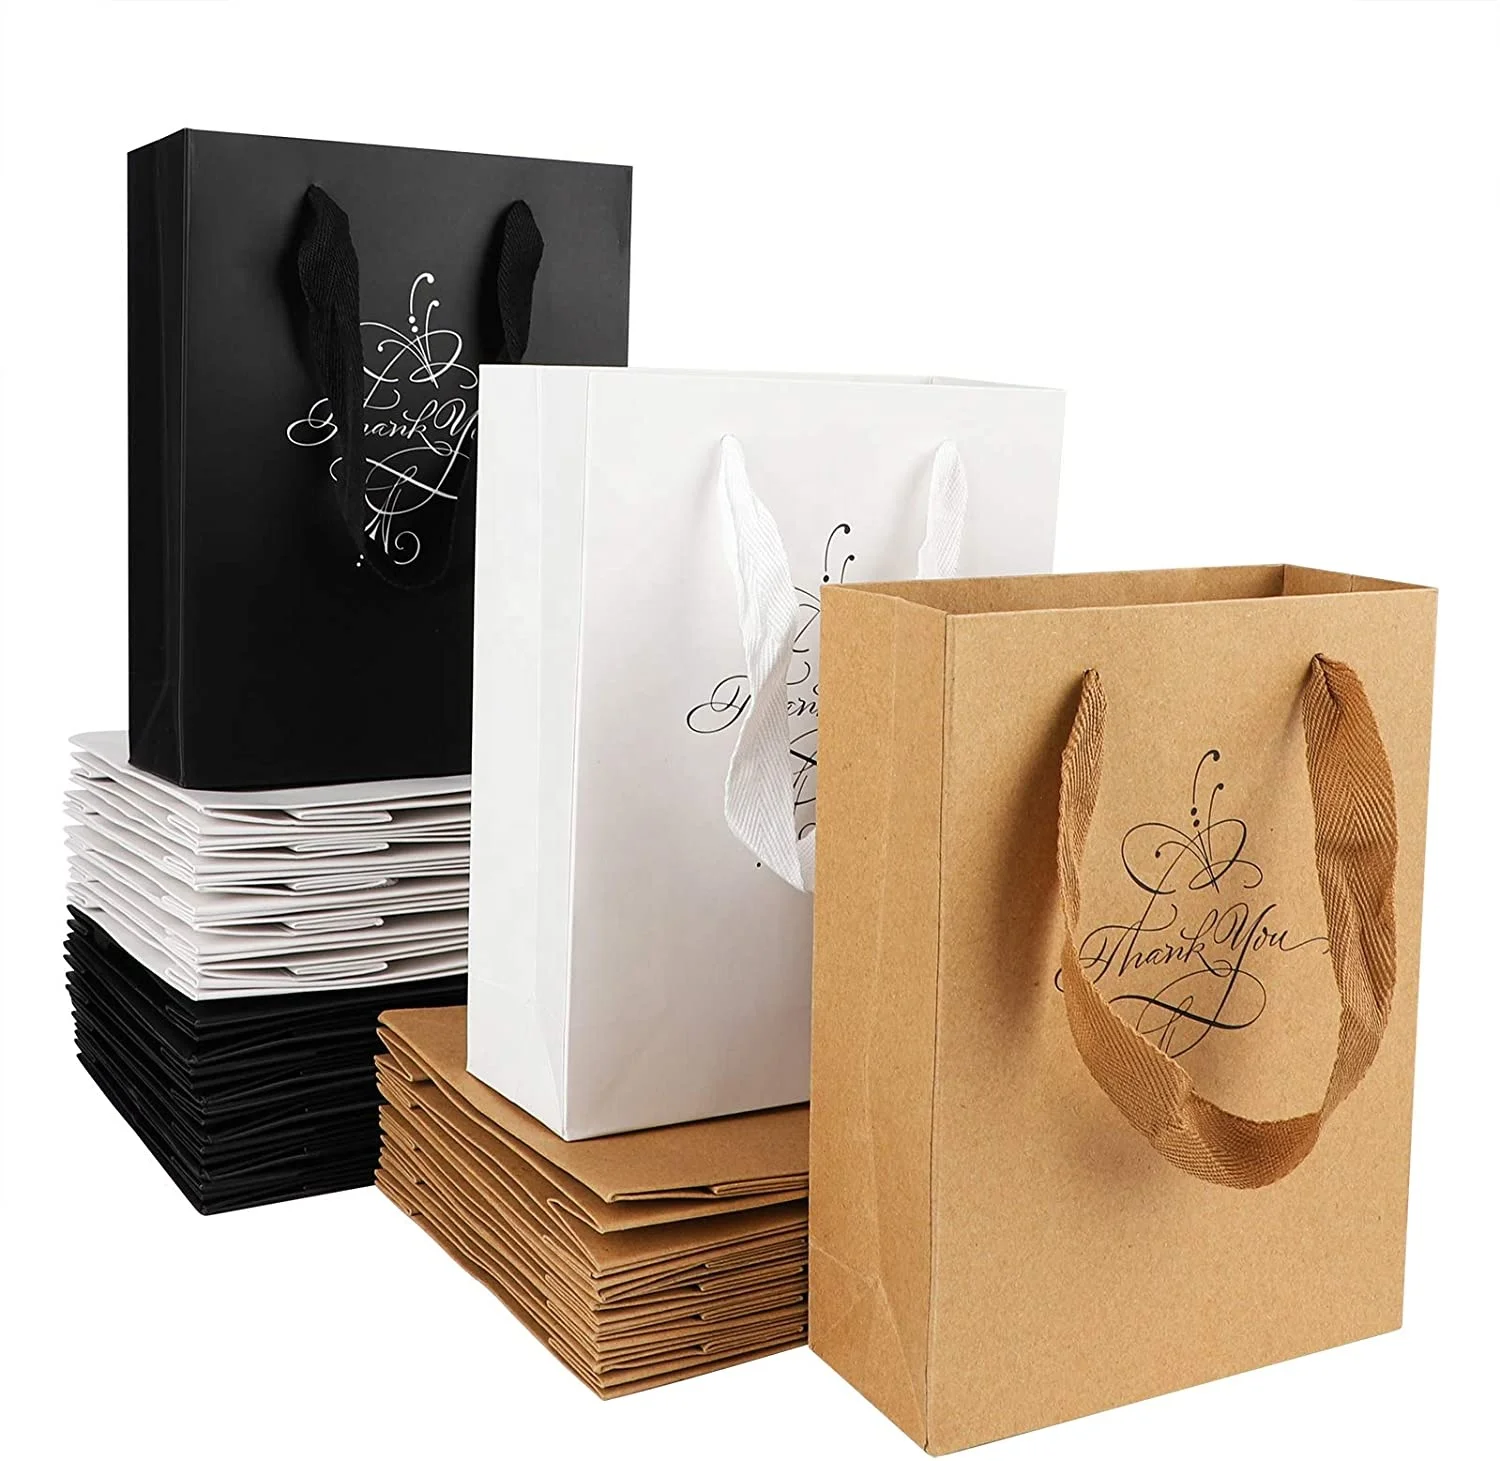 
Promotional Gift Party Shopping Kraft Retail Merchandise Brown Paper Bags with your own logo 